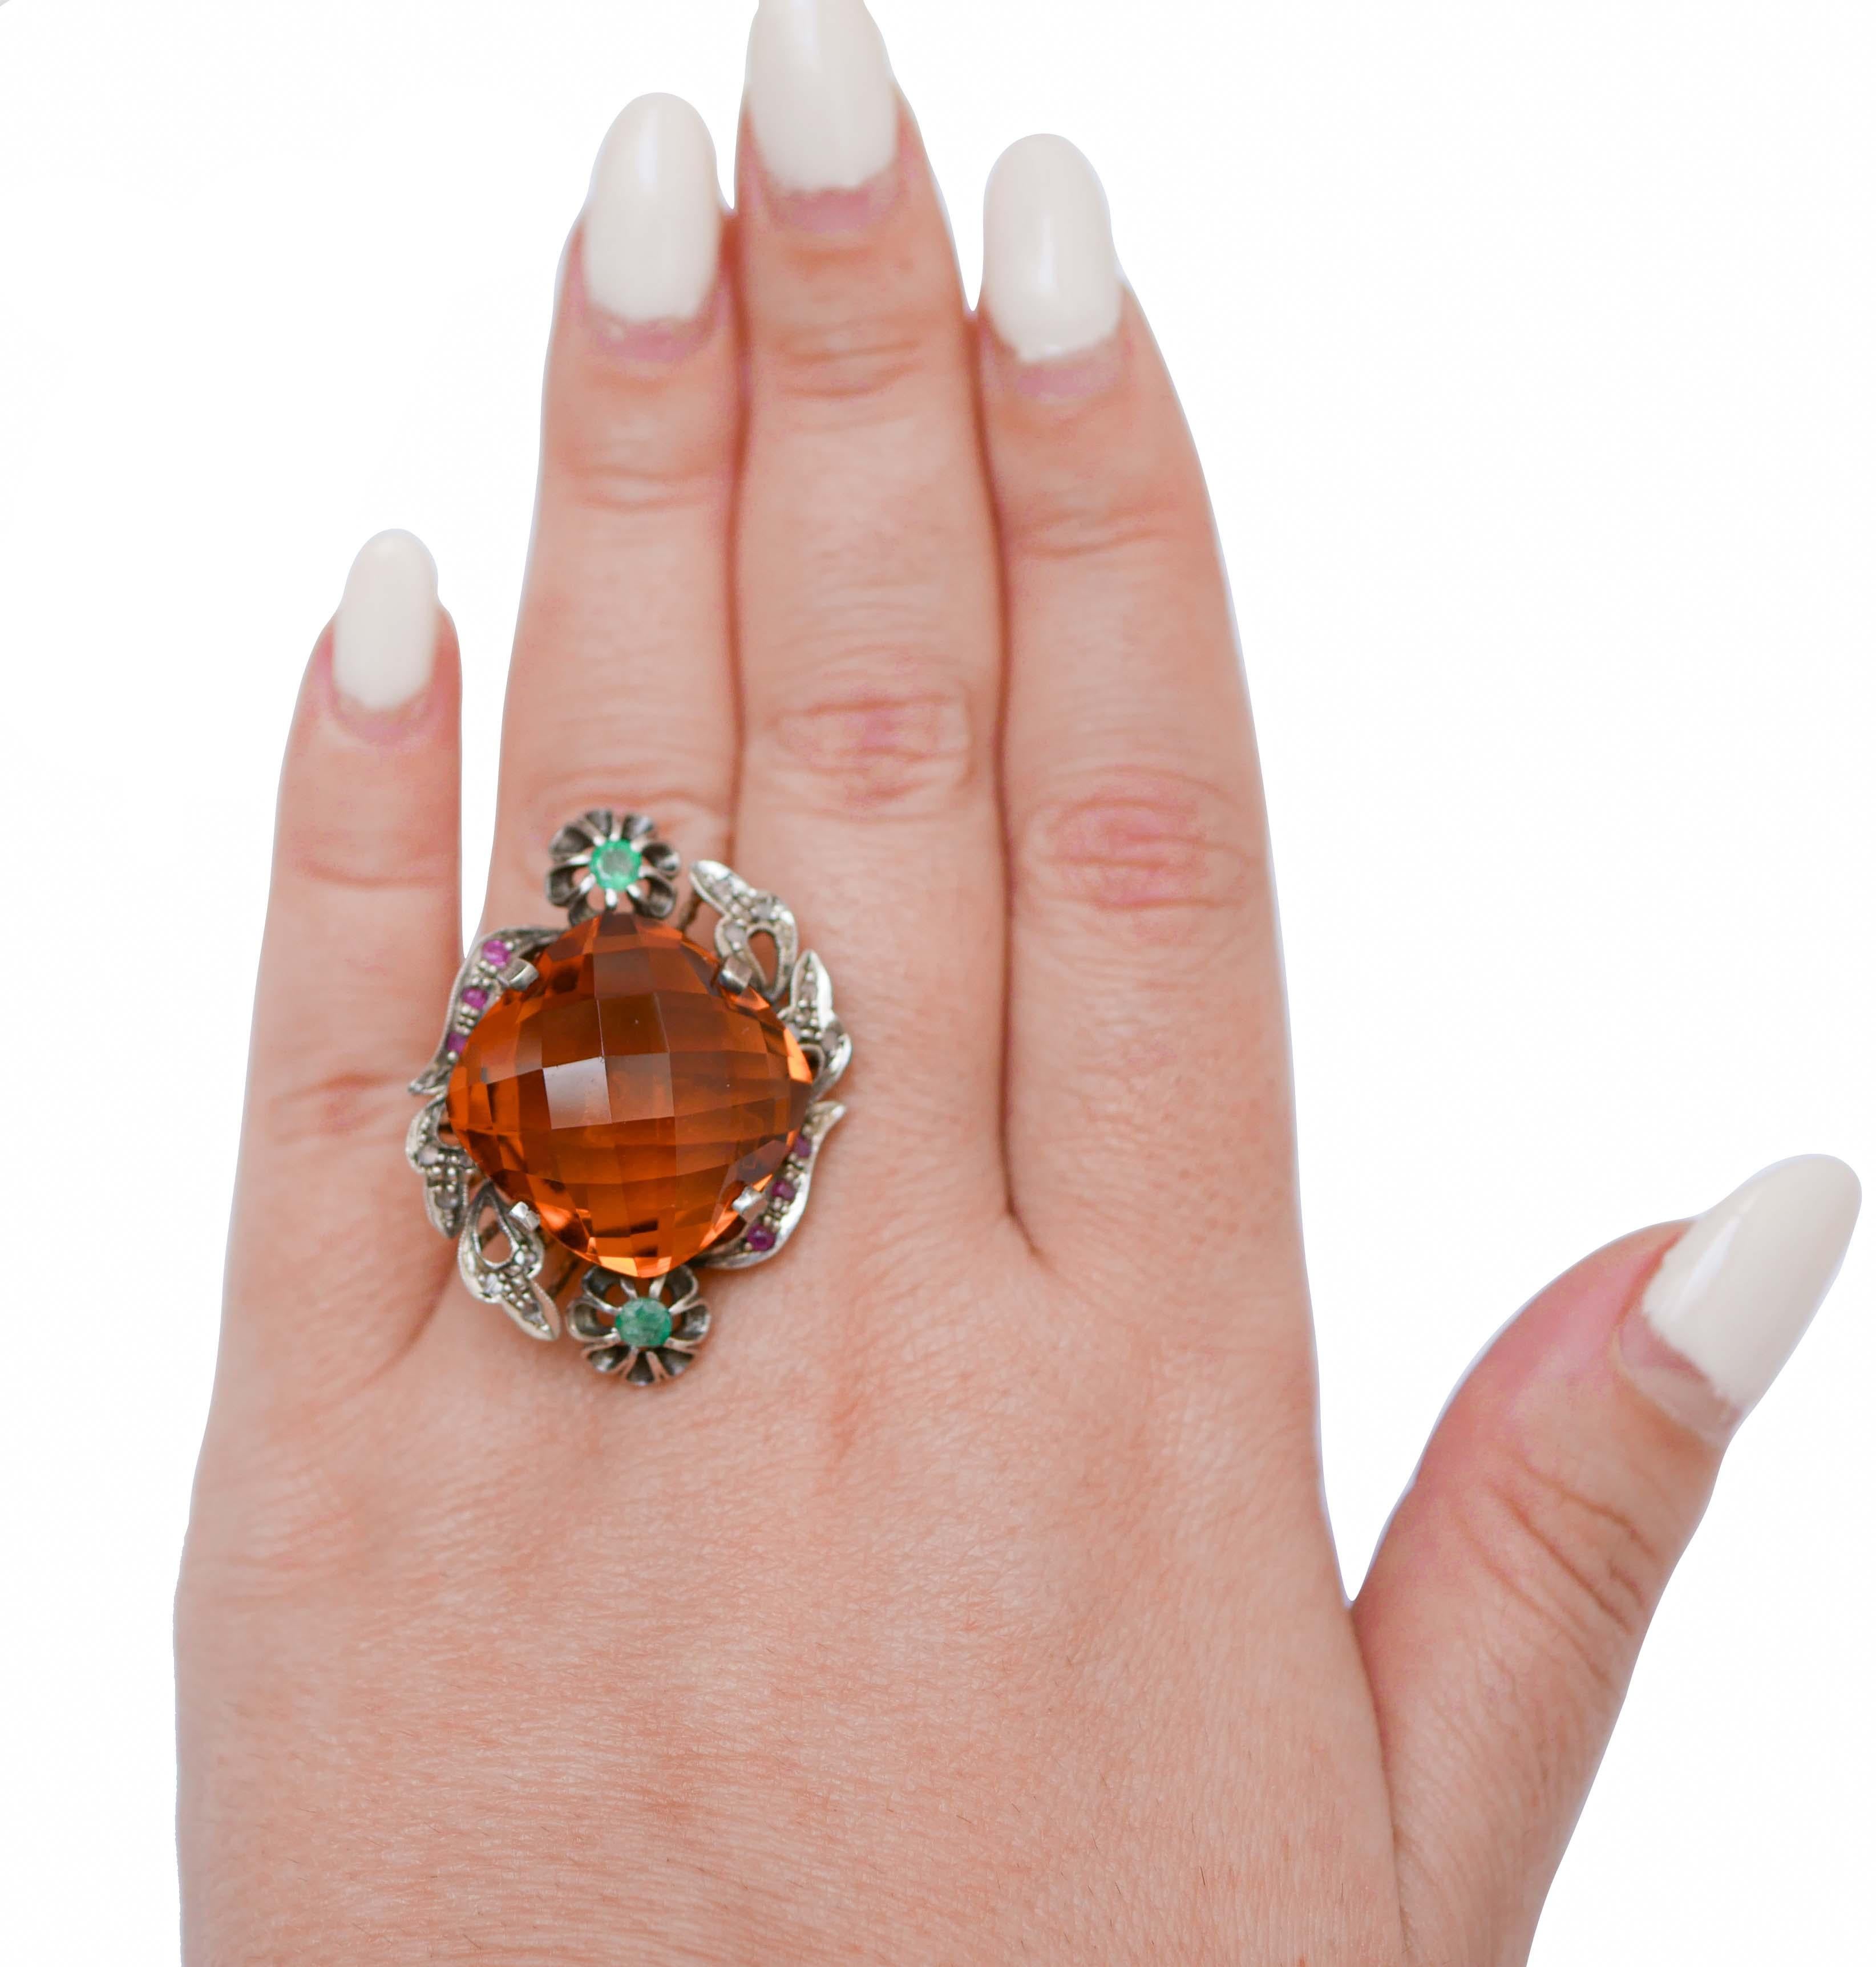 Mixed Cut Topaz, Emeralds, Rubies, Diamonds, Rose Gold and Silver Ring. For Sale